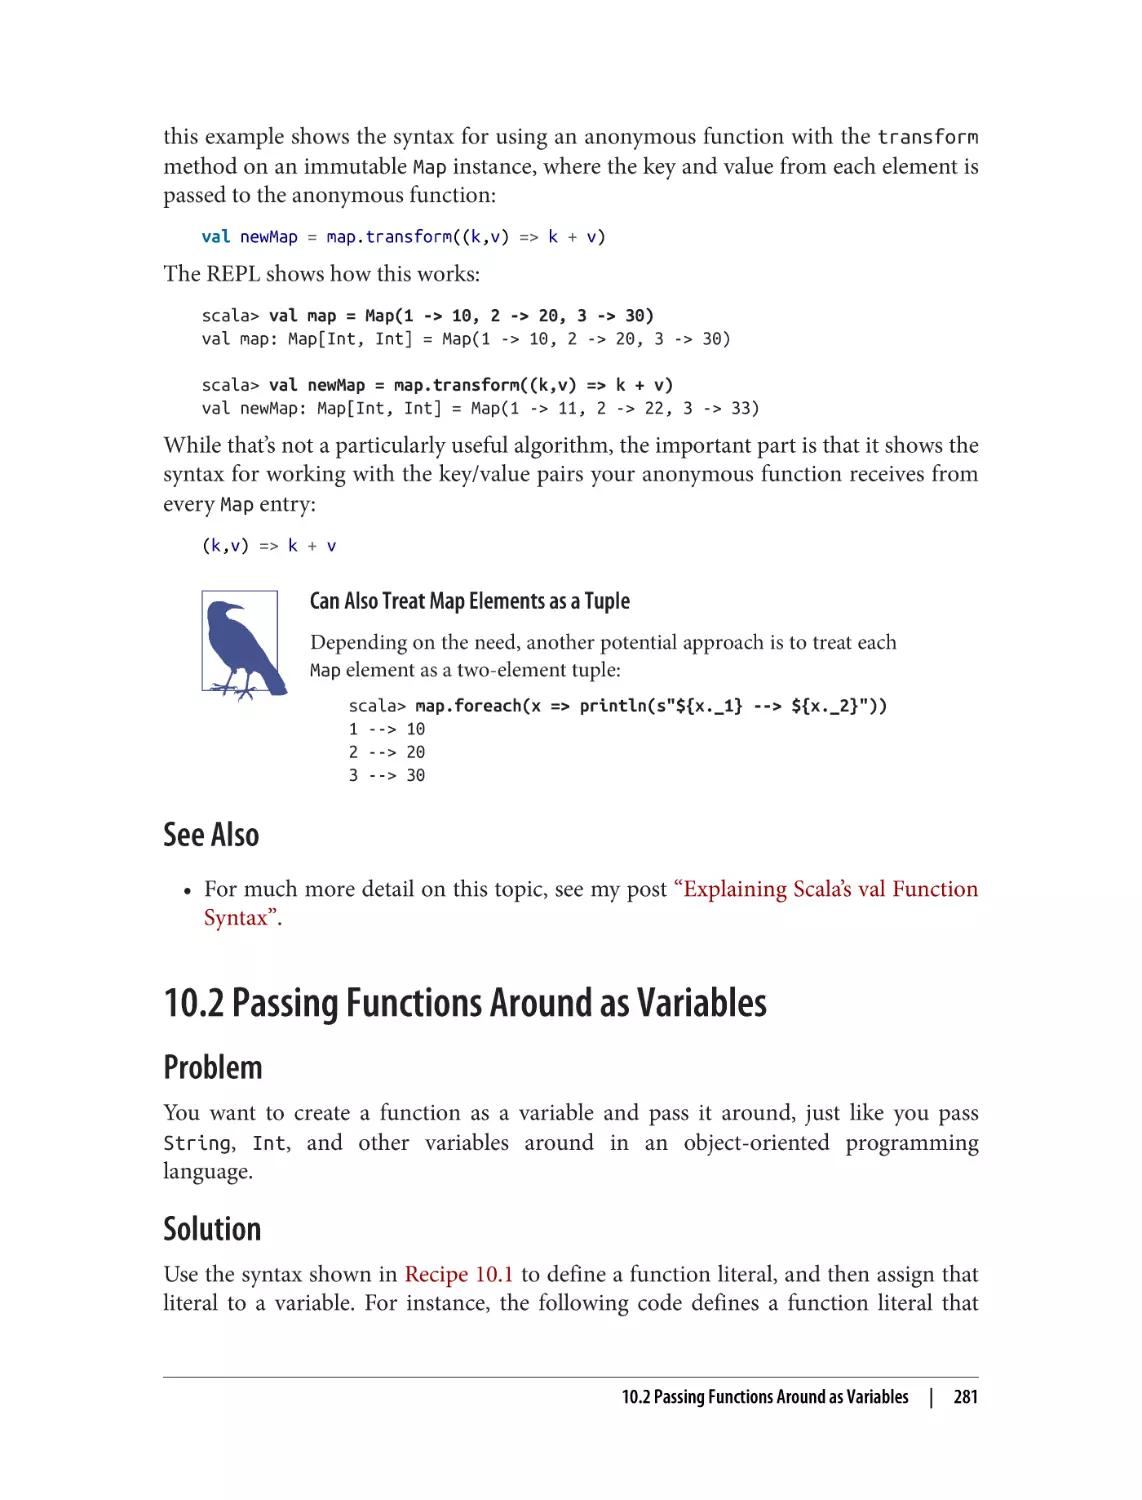 See Also
10.2 Passing Functions Around as Variables
Problem
Solution